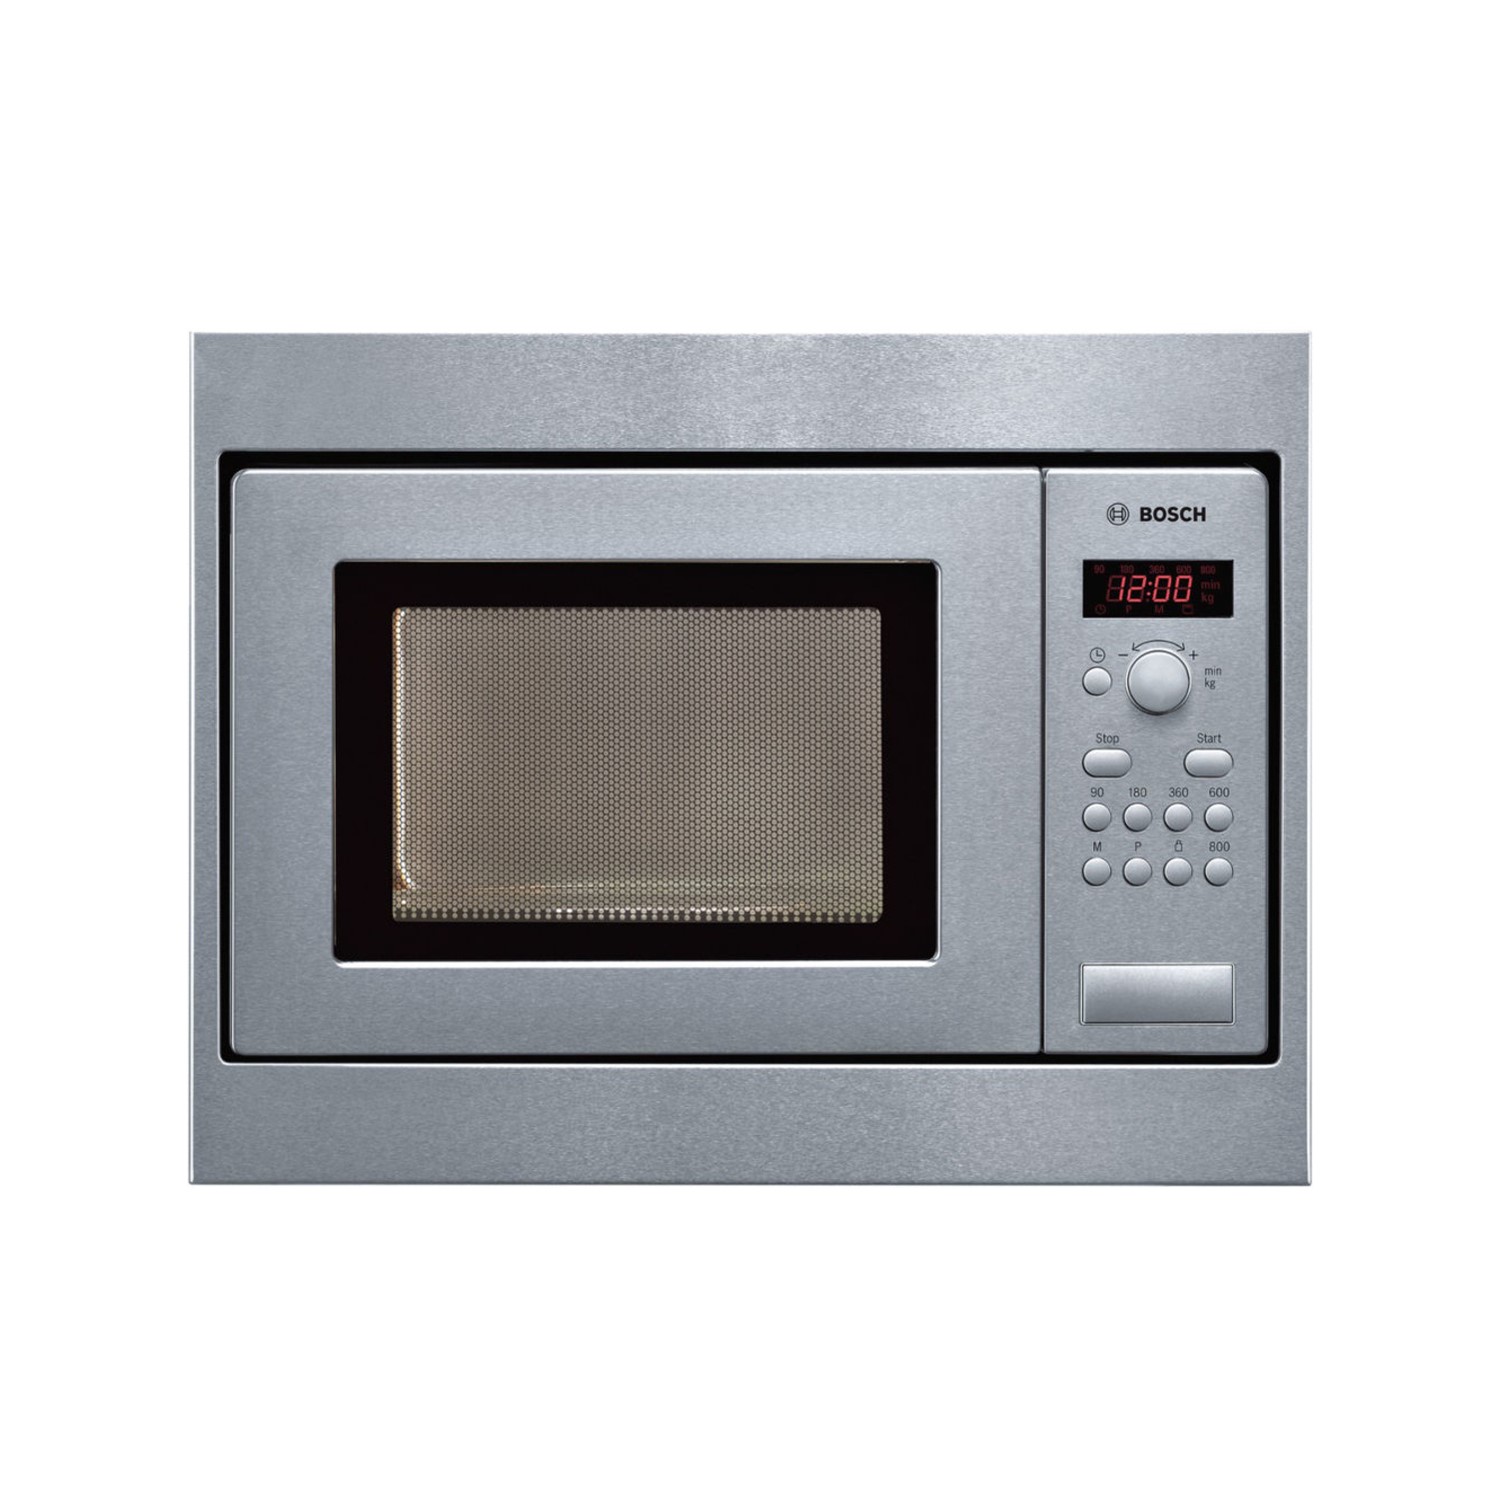 Bosch Serie 2 17L 800W Built-in Microwave - Stainless Steel